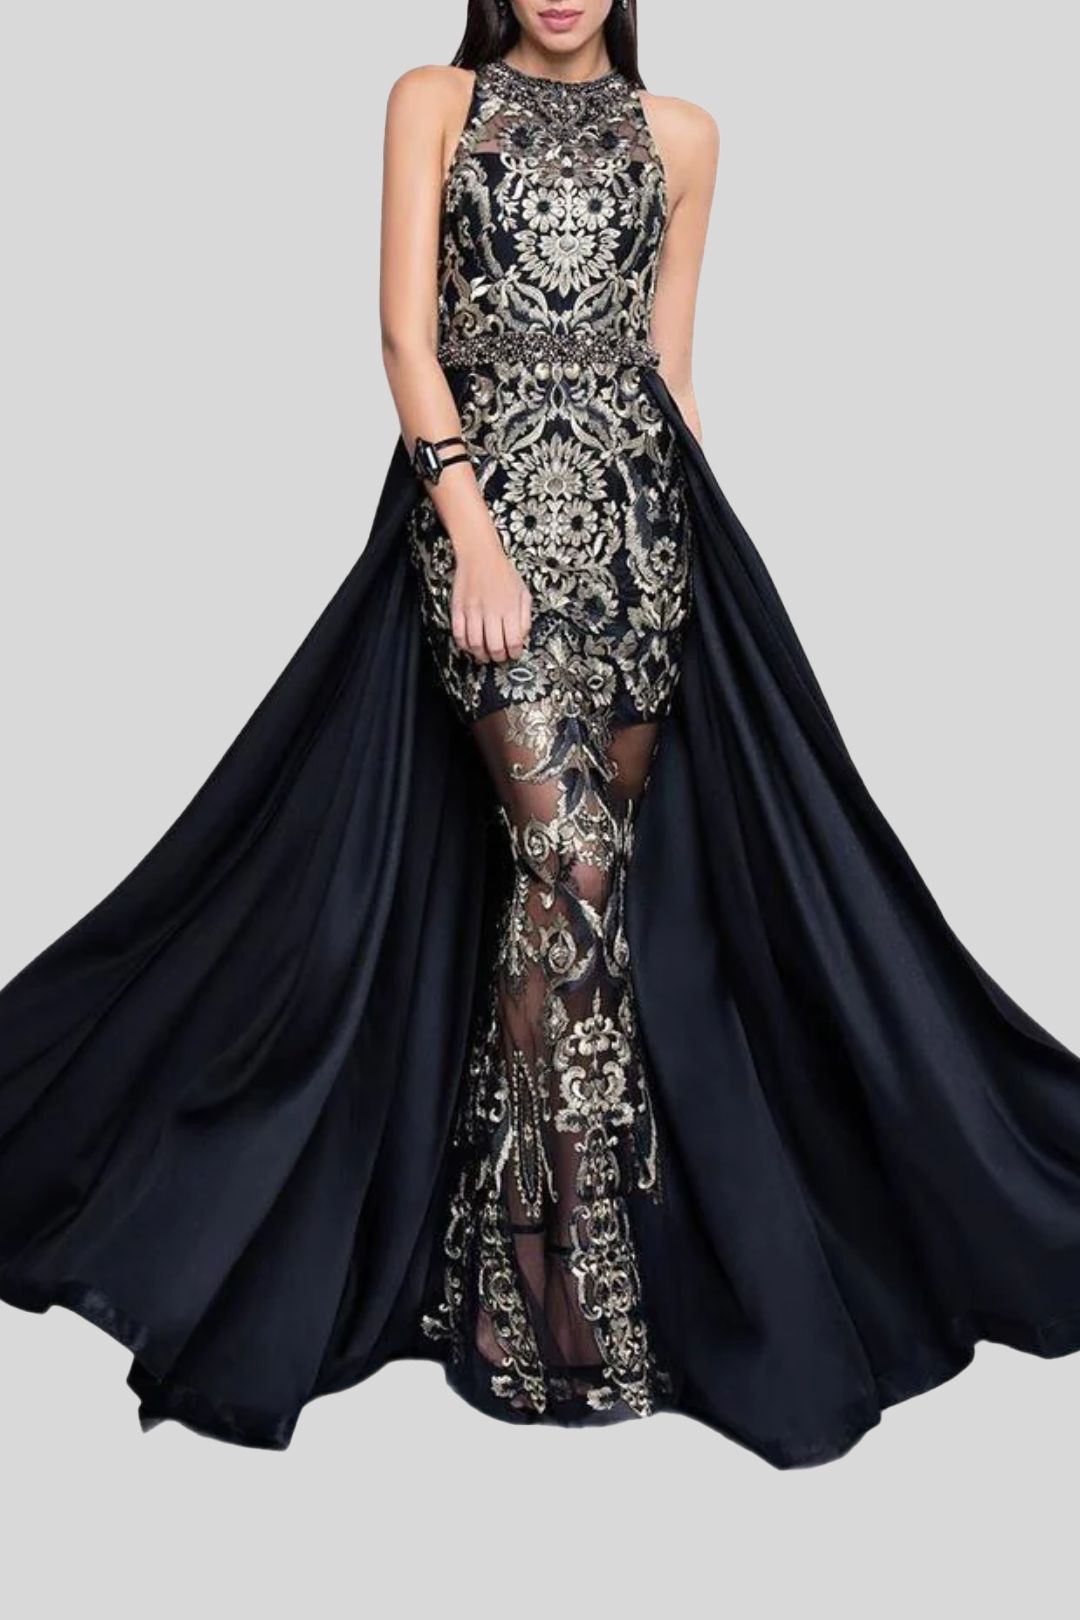 Terani Sleeveless Bateau Neck Evening Gown in Black and Gold